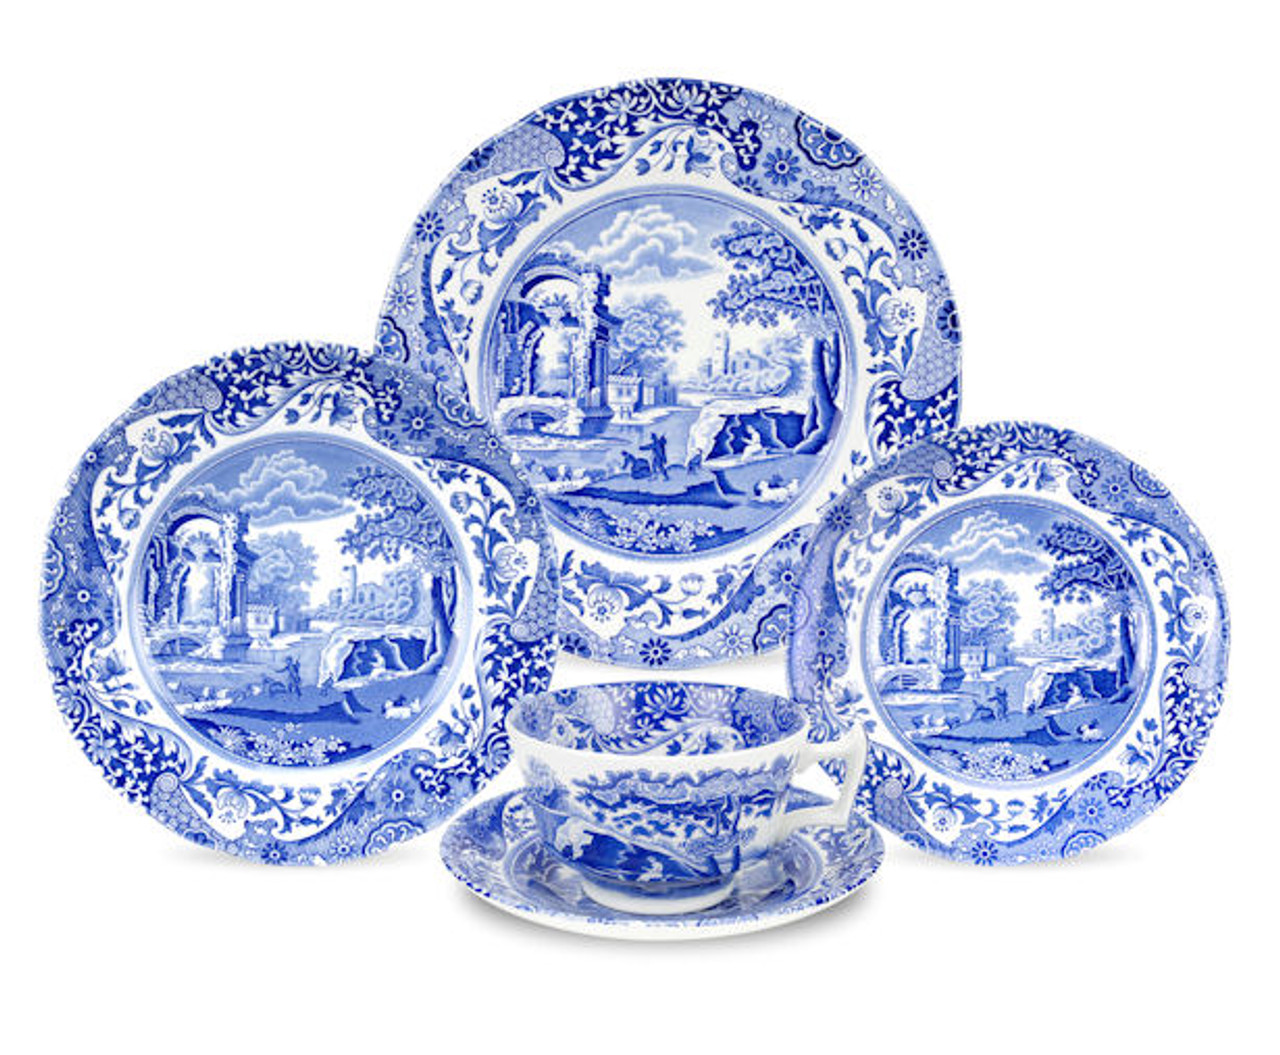 Set of Five (5) Willow Ware Blue & White Plates, England